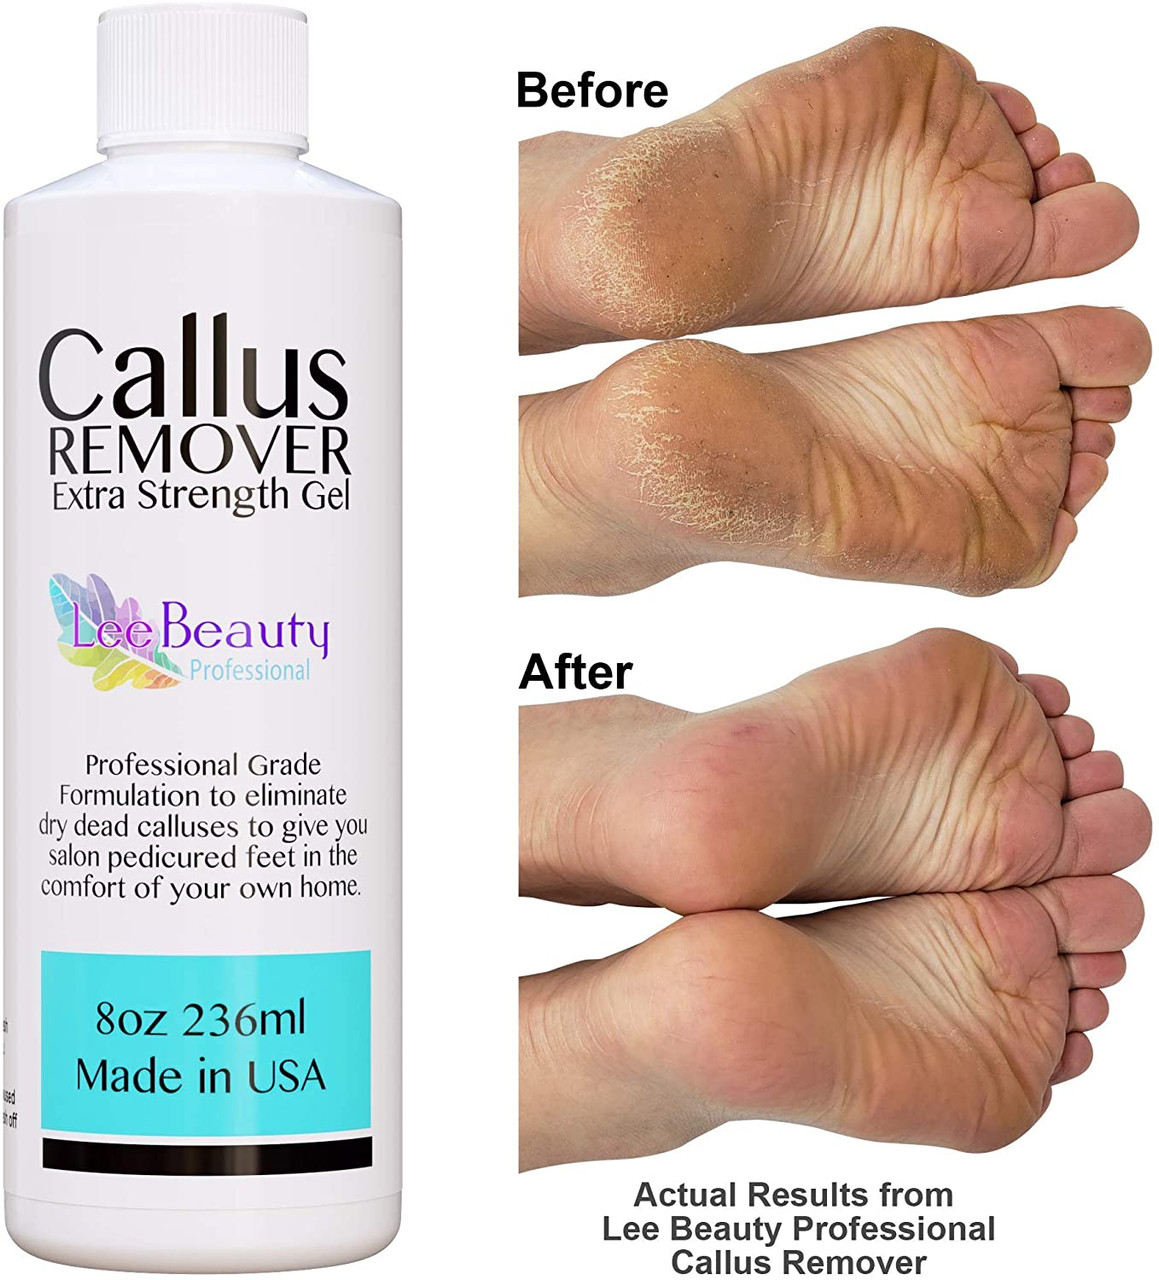 Lee Beauty's Callus Remover For Feet Eliminates Dead Skin Fast – StyleCaster